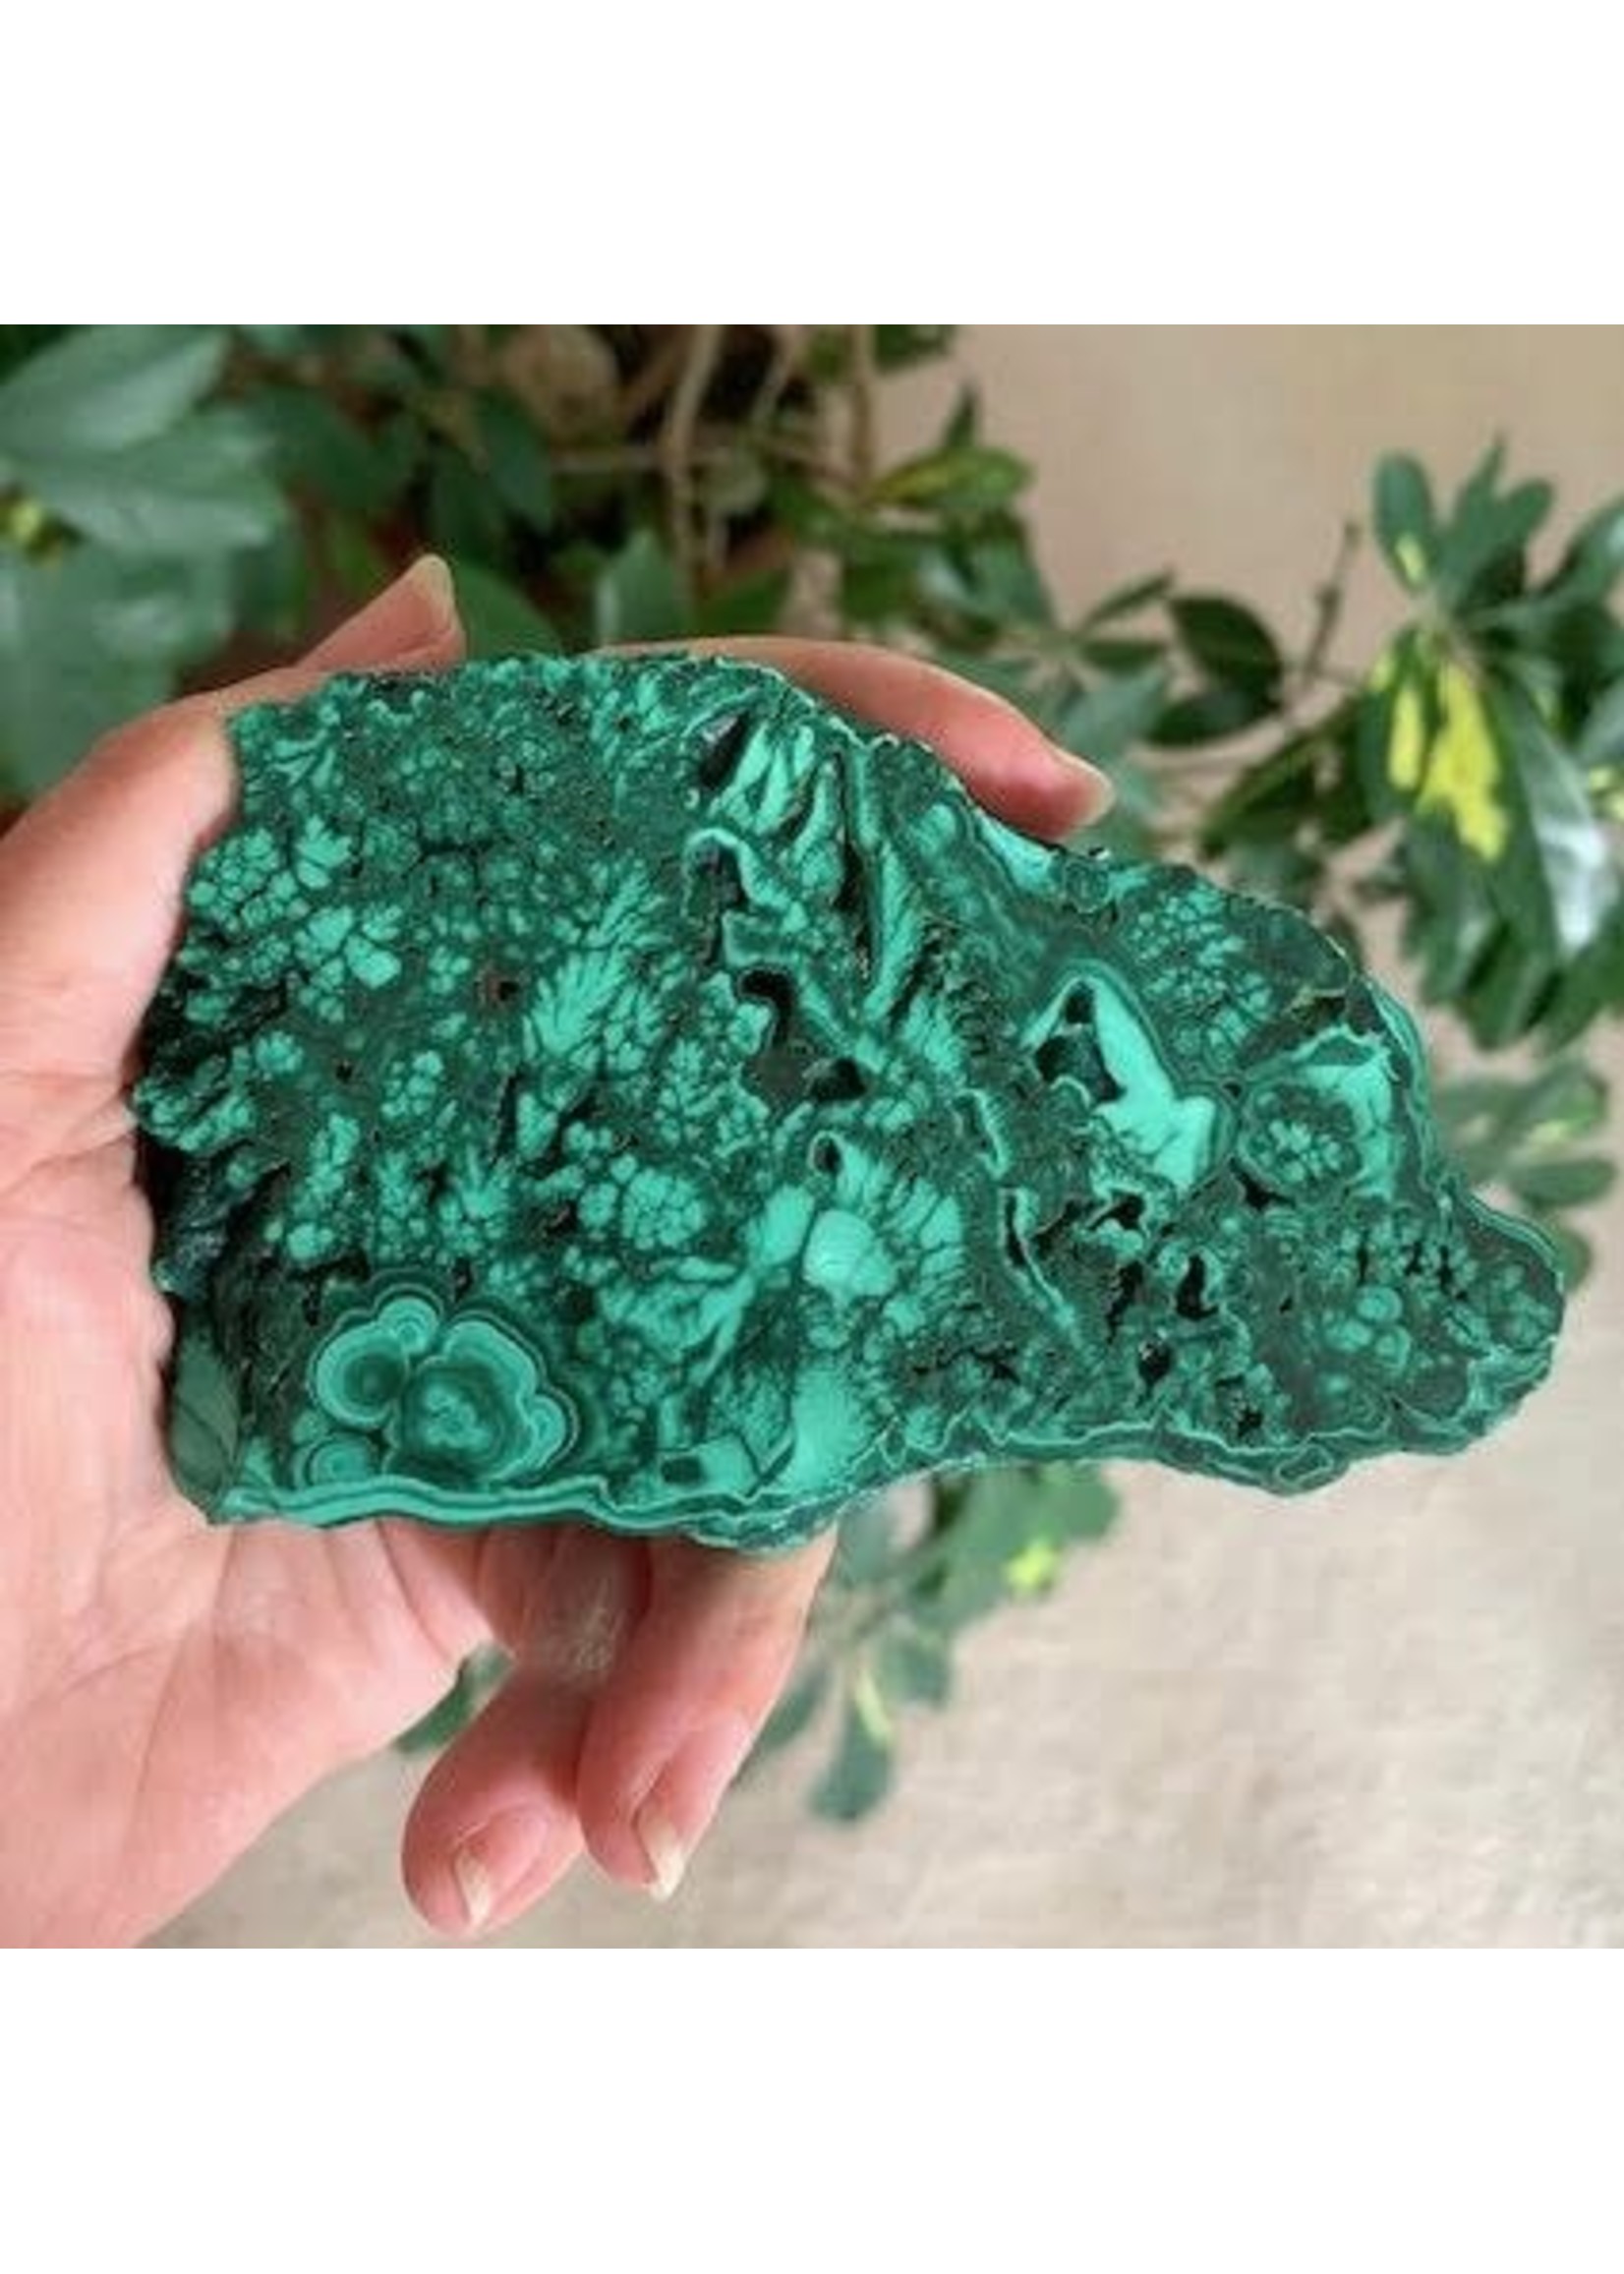 Malachite Charging Plates for transformation and renewal